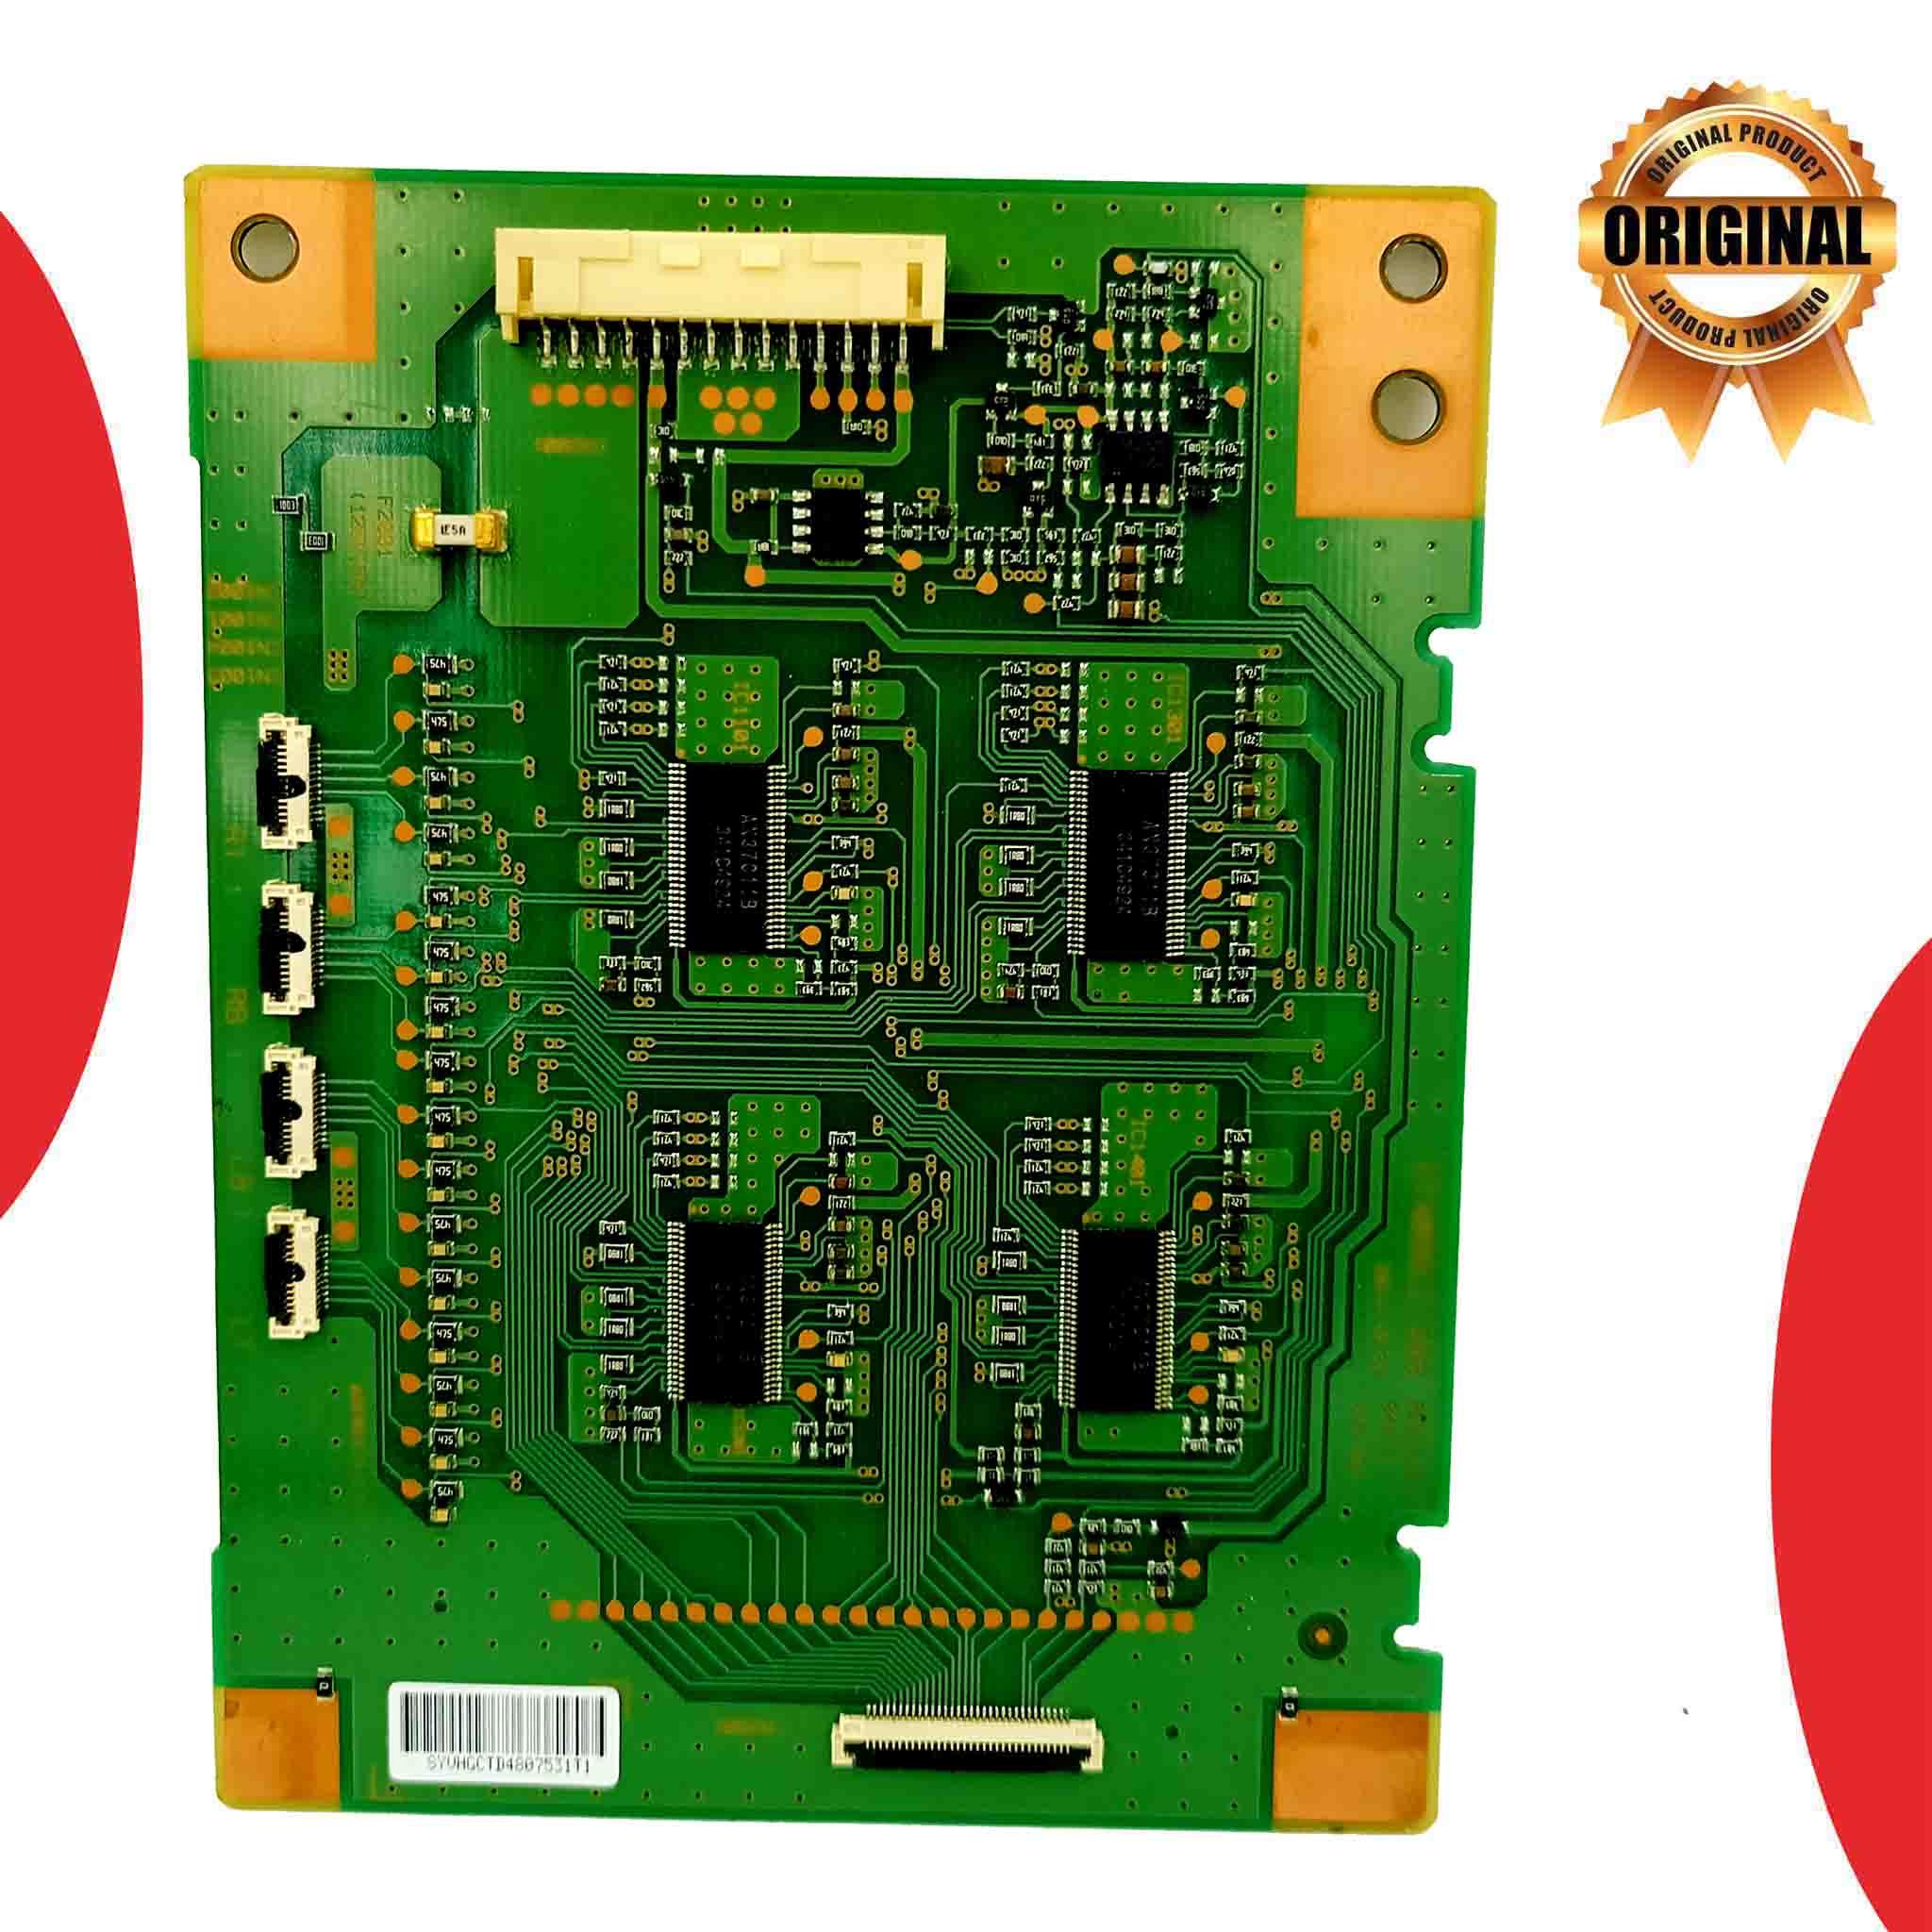 Model 40W900A Sony LED TV PCB at Attractive Price